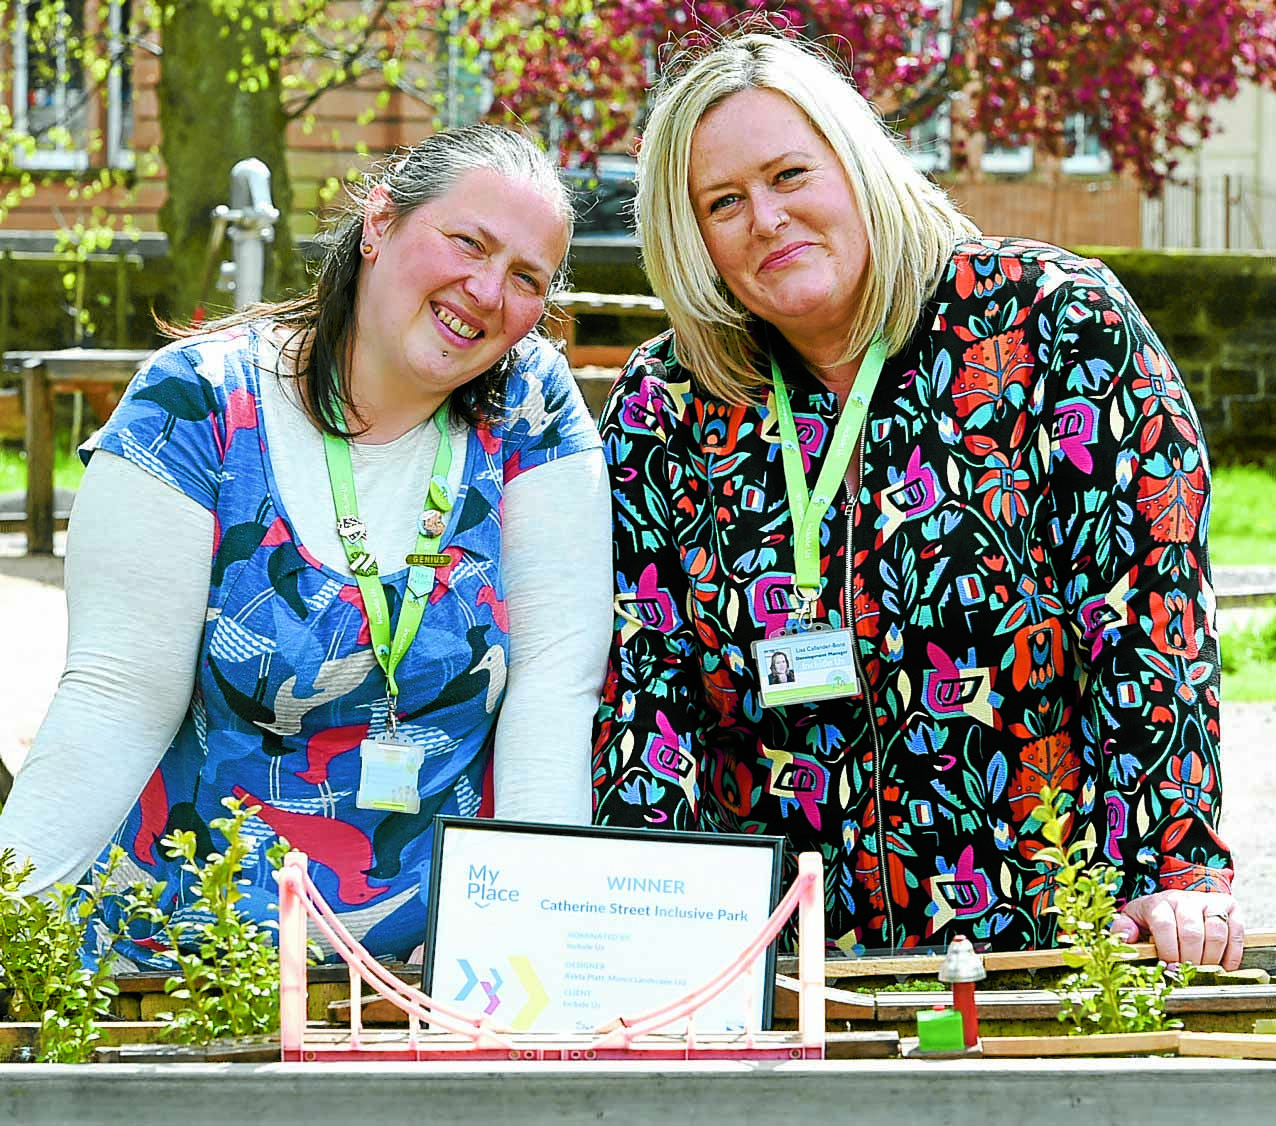 Award winning park hailed as a model for others